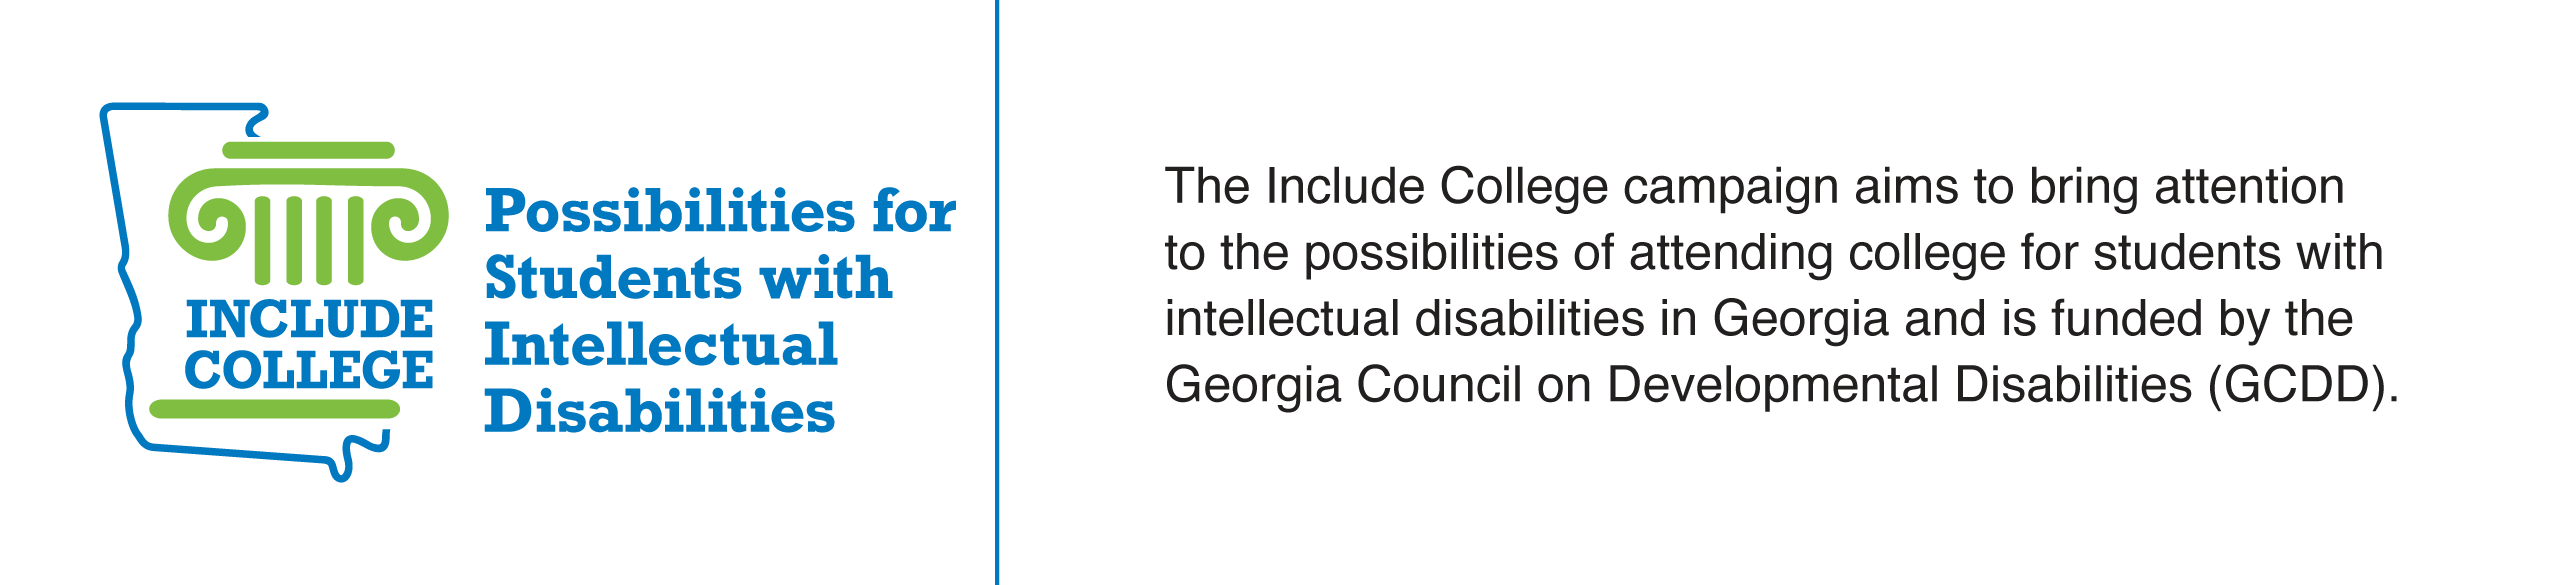 Include College logo with the following: The Include College campaign aims to bring attention to the possibilities of attending college for students with intelectual disabilities (I/DD) in Georgia and is funded by the Georgia Council on Developmental Disabilities (GCDD)